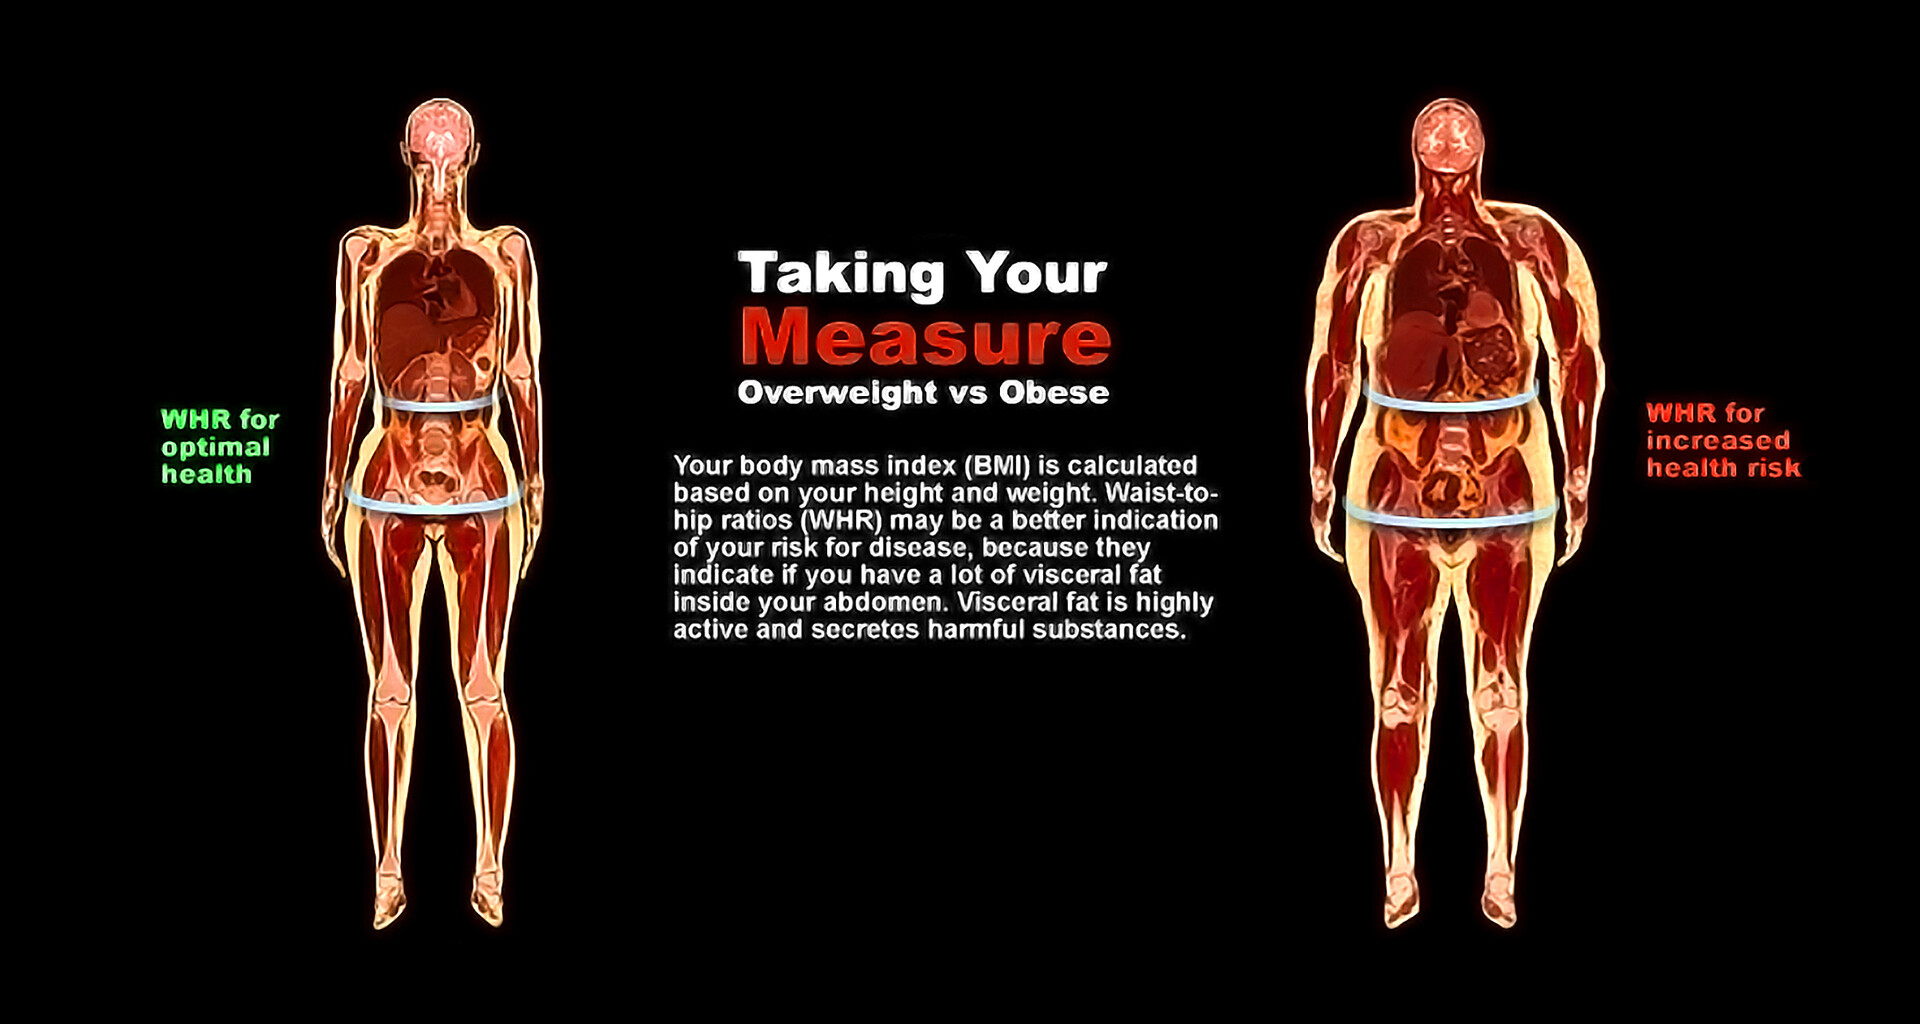 How to Measure Hips and Waist Ratio